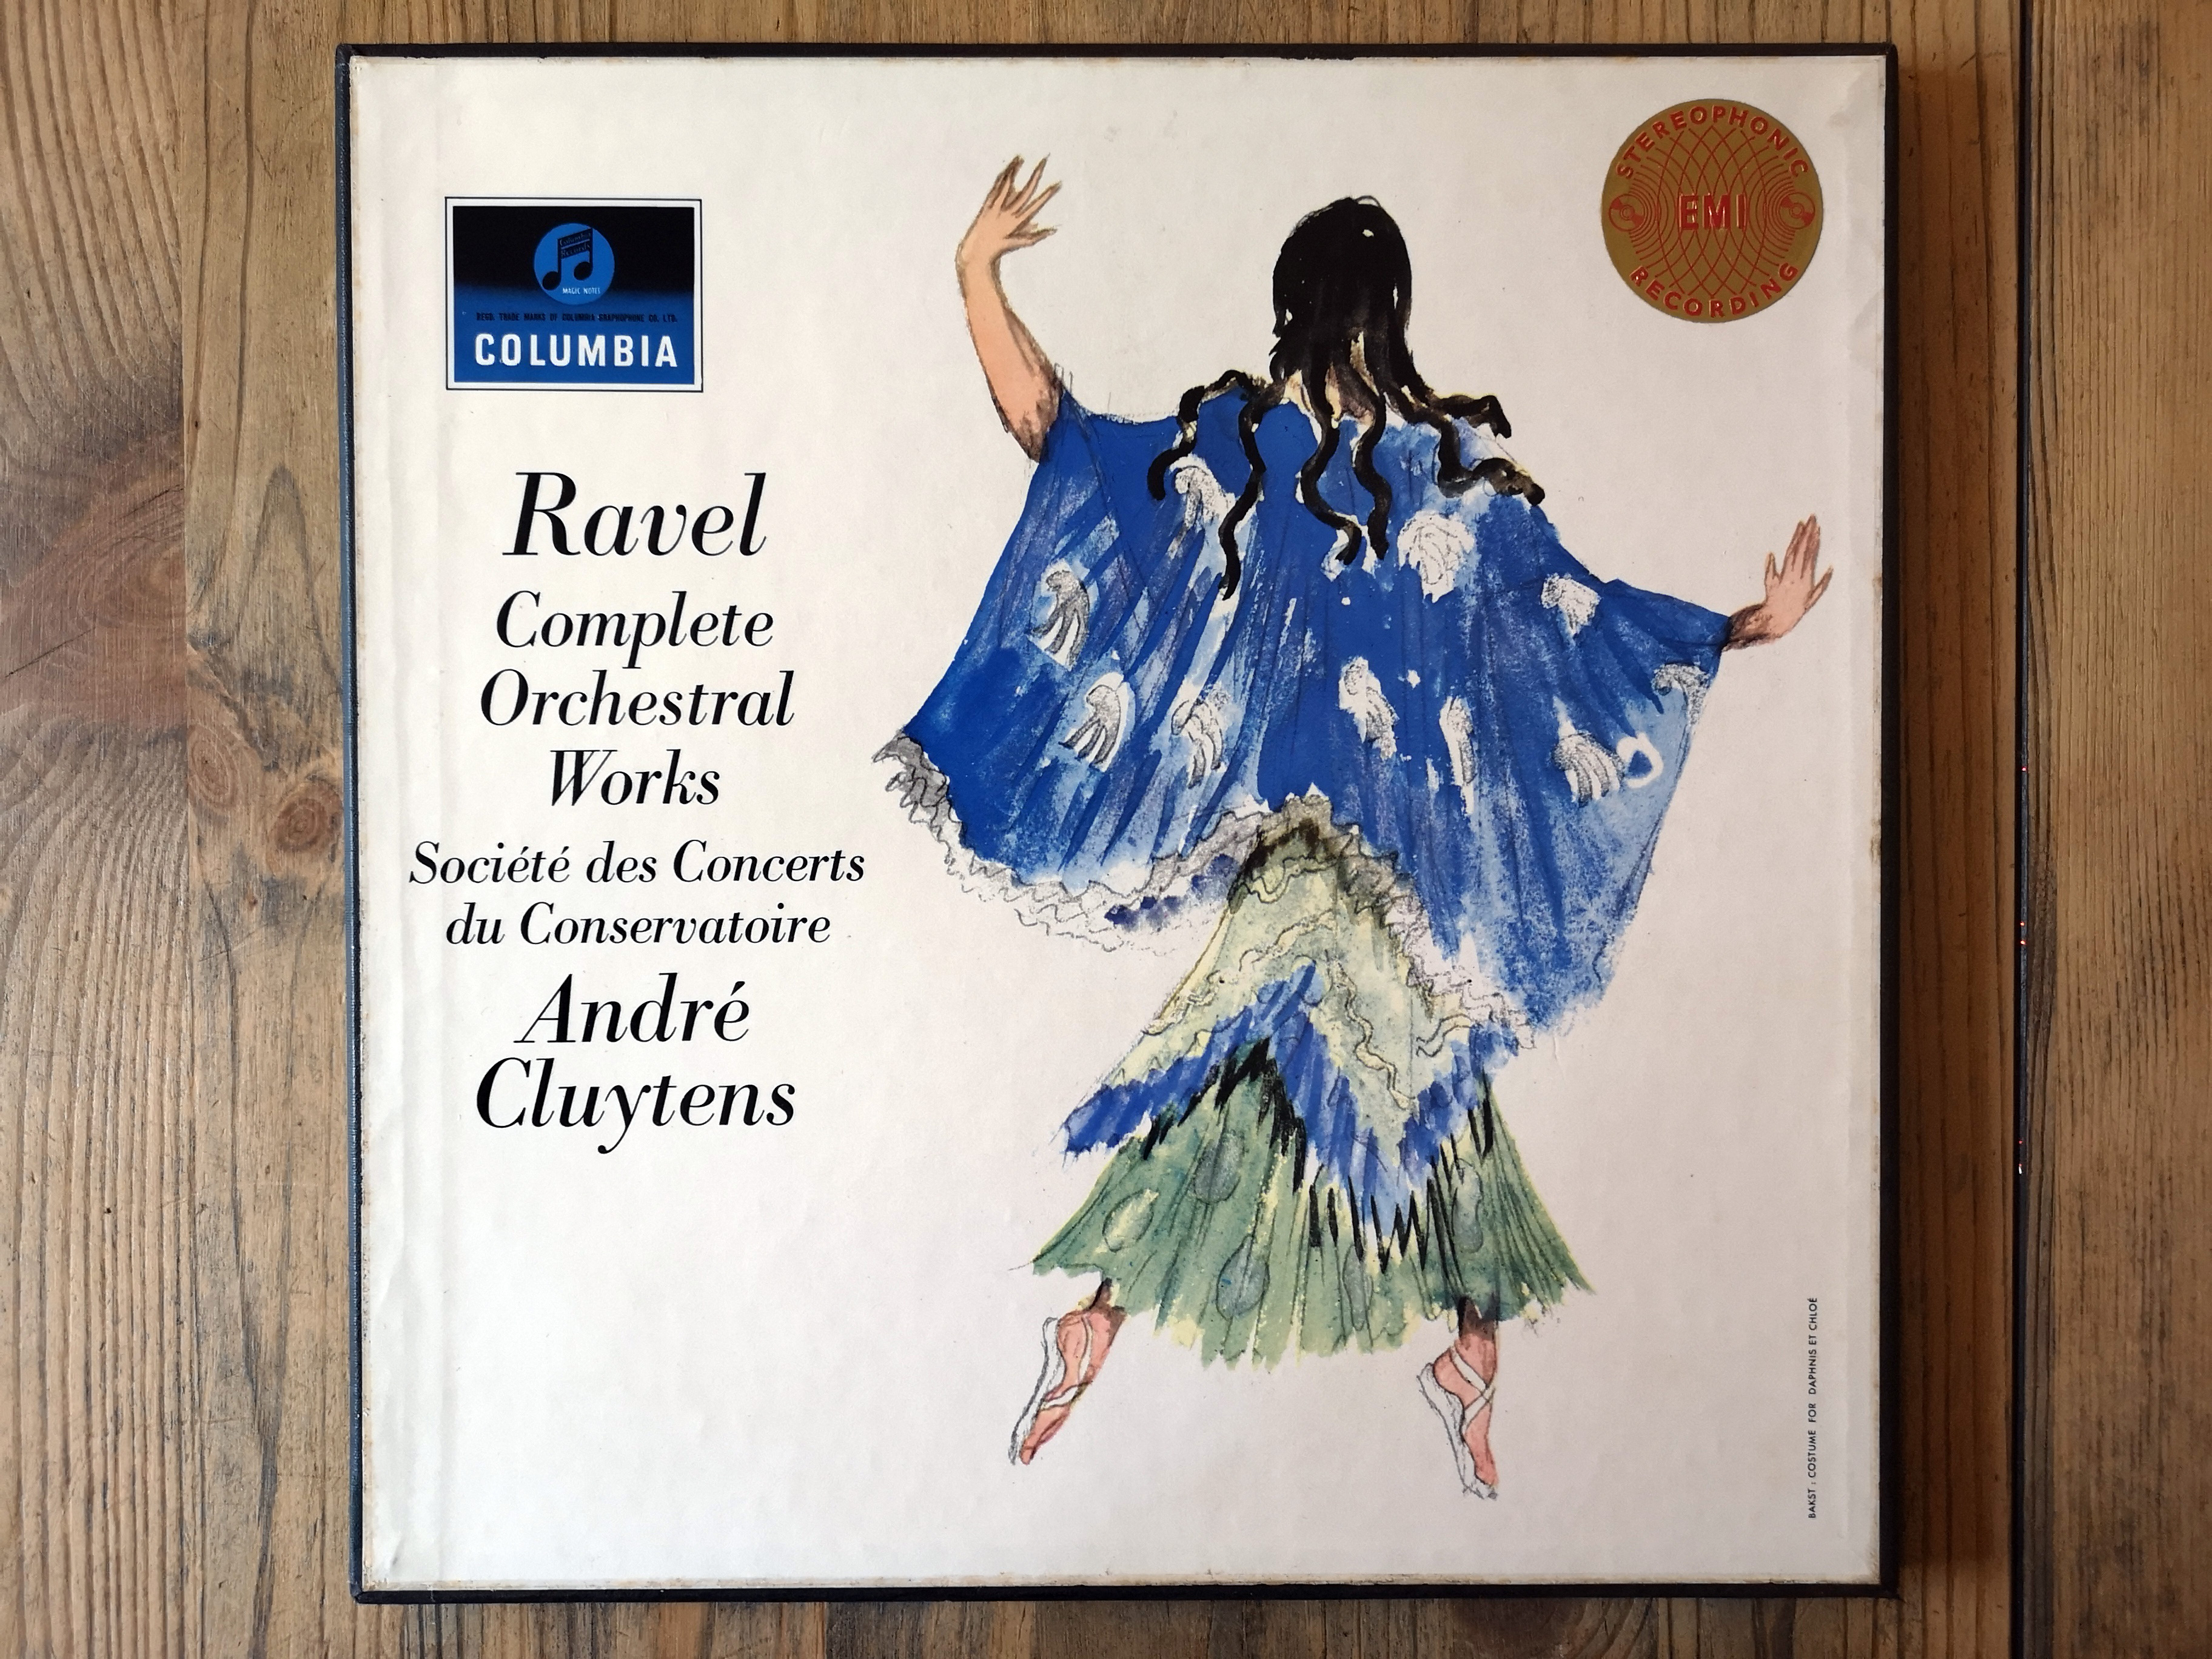 ERC061 - The Complete Orchestral Works of Maurice Ravel conducted by André Cluytens